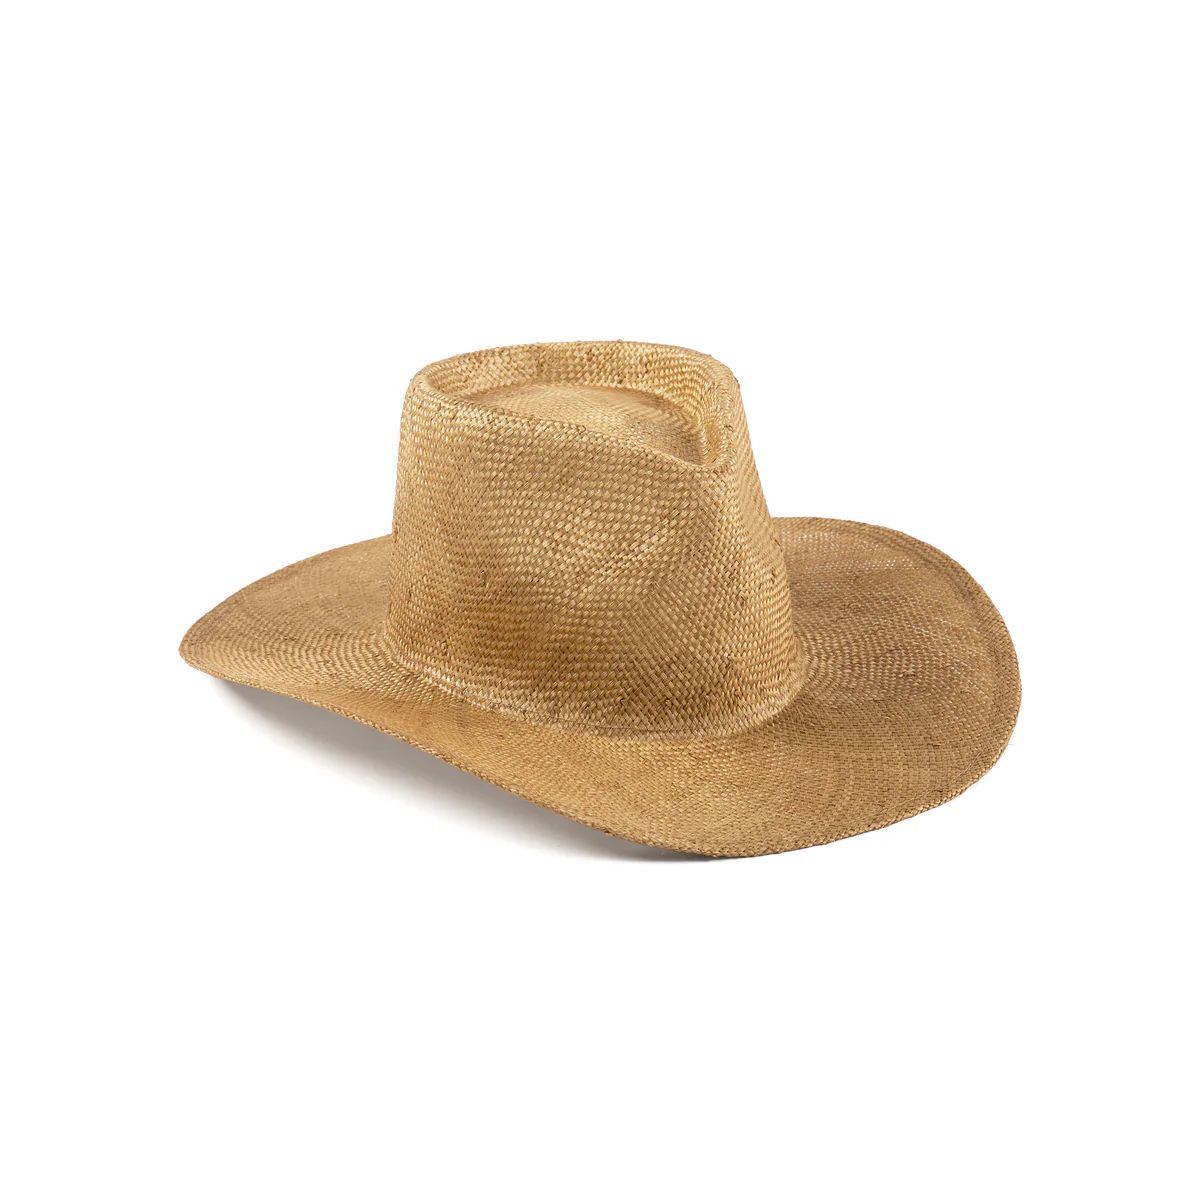 The Oasis - Straw Fedora Hat in Brown | Lack of Color US | Lack of Color